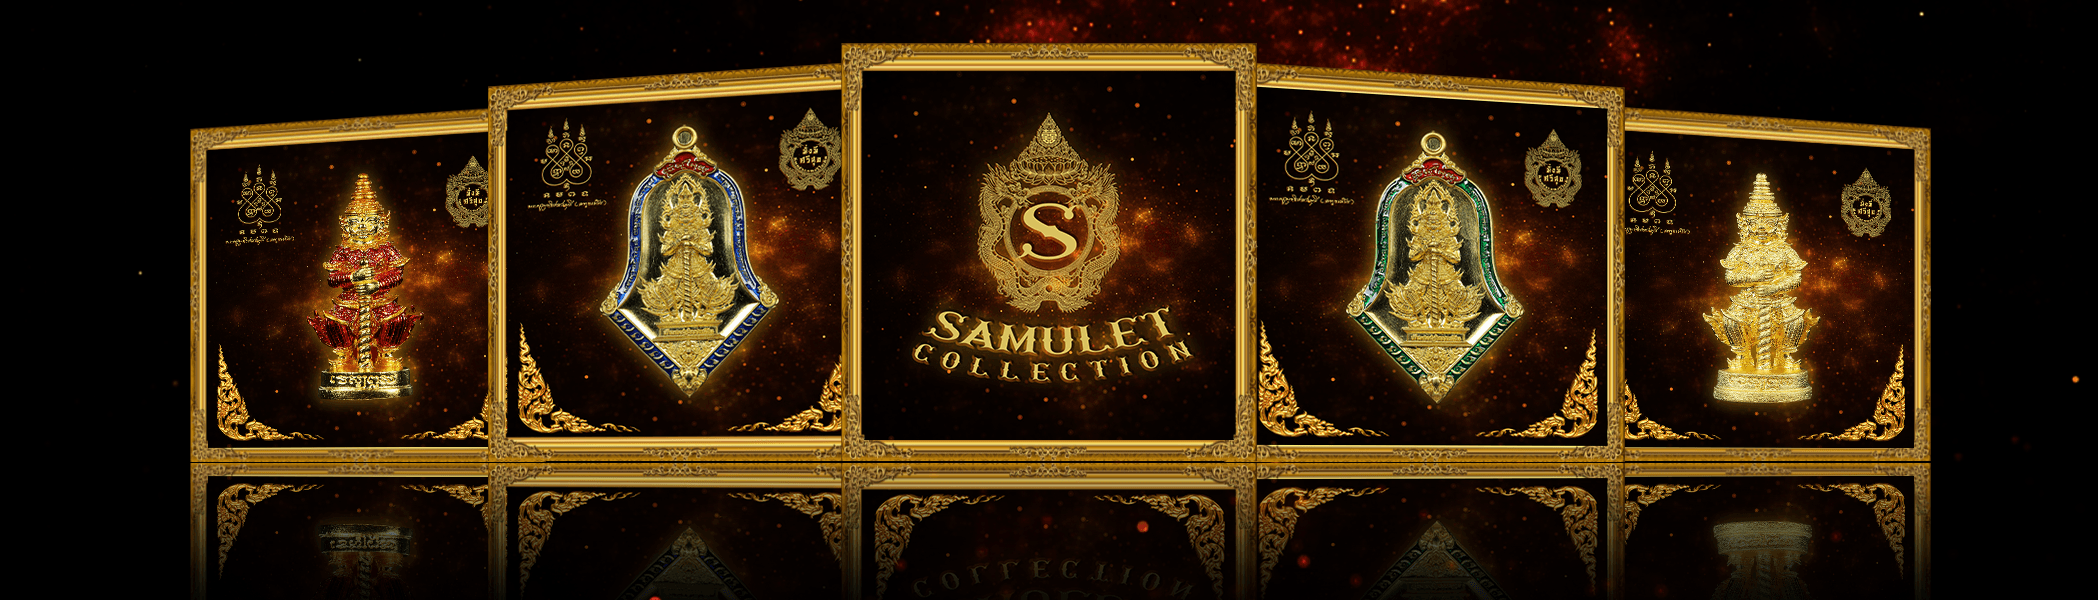 SAmulet_Collection banner